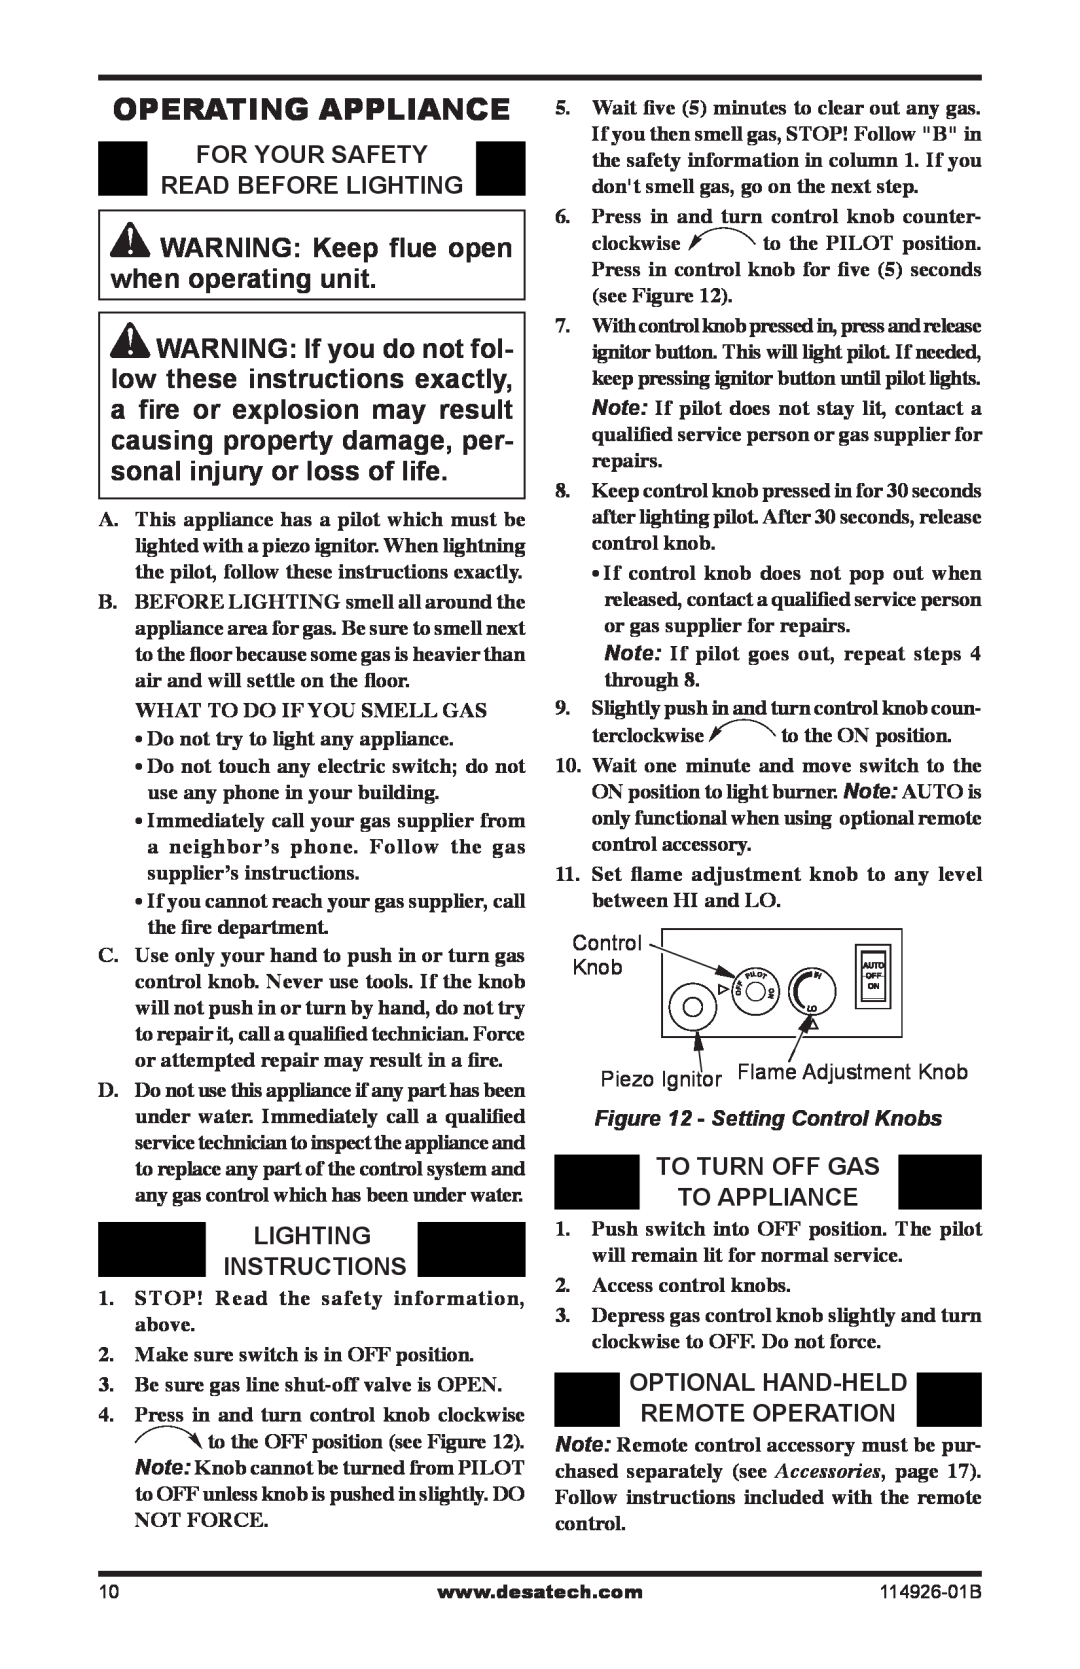 Desa VTDMV18PA, VTDMV24PA For Your Safety Read Before Lighting, Lighting Instructions, To Turn Off Gas, To Appliance 